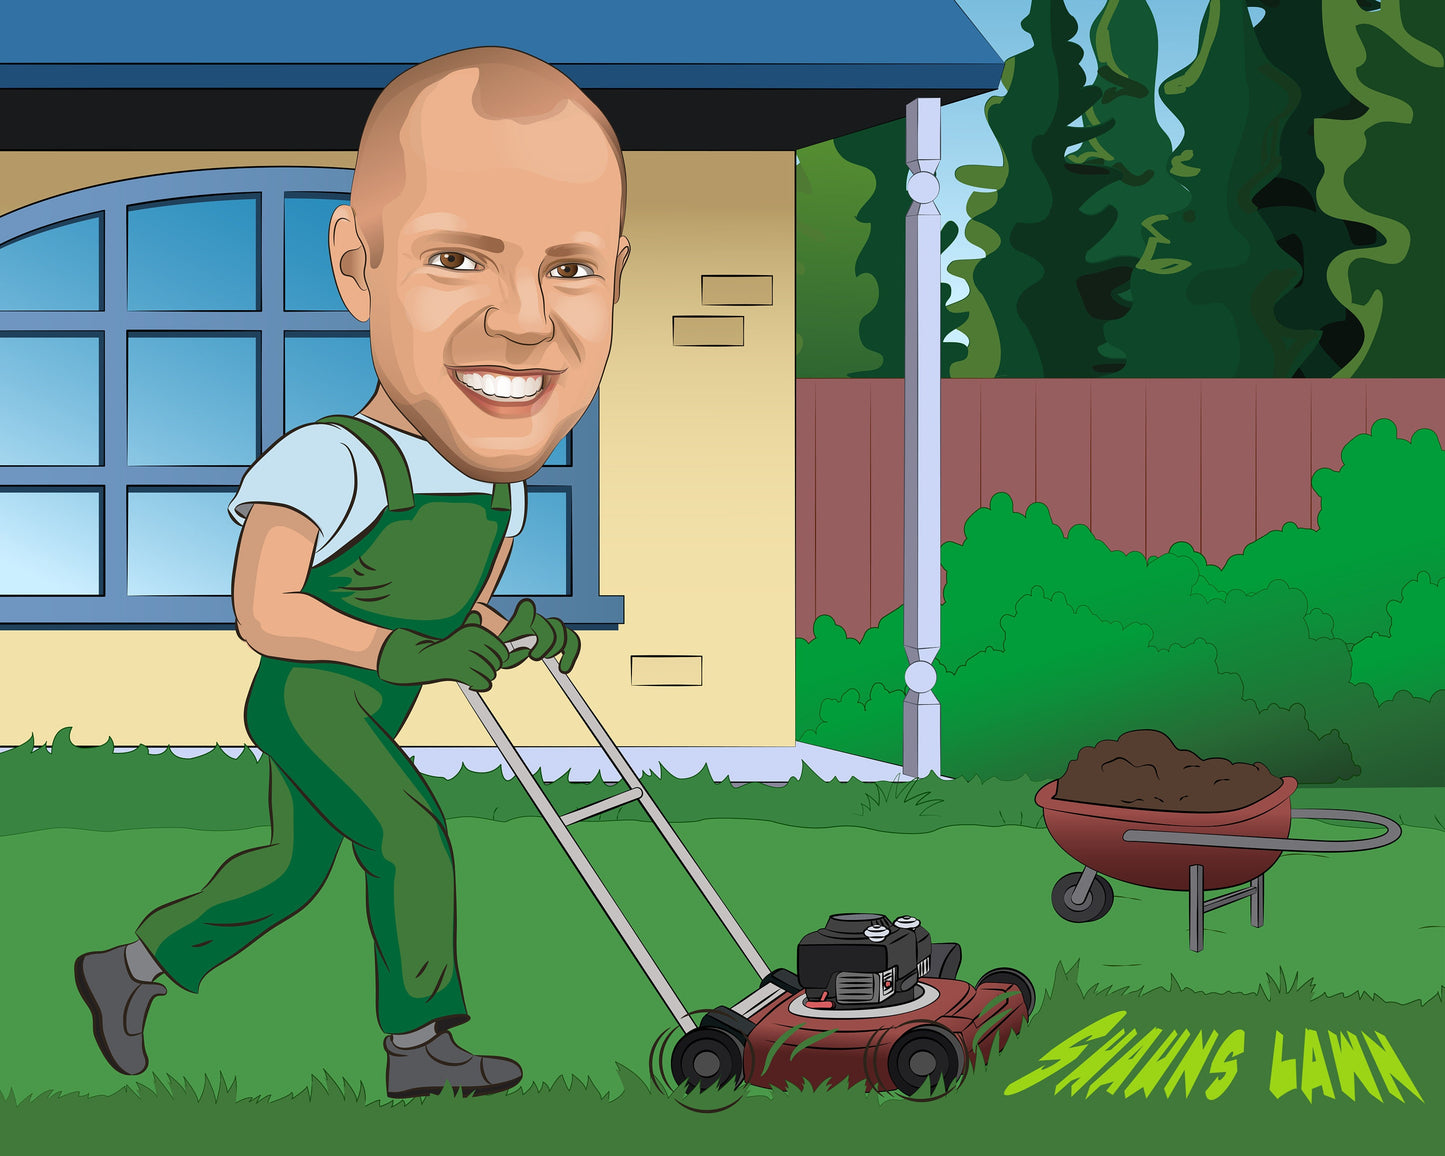 Lawn Care Gift - Custom Caricature From Photo/Lawn Care Professional/lawn mower